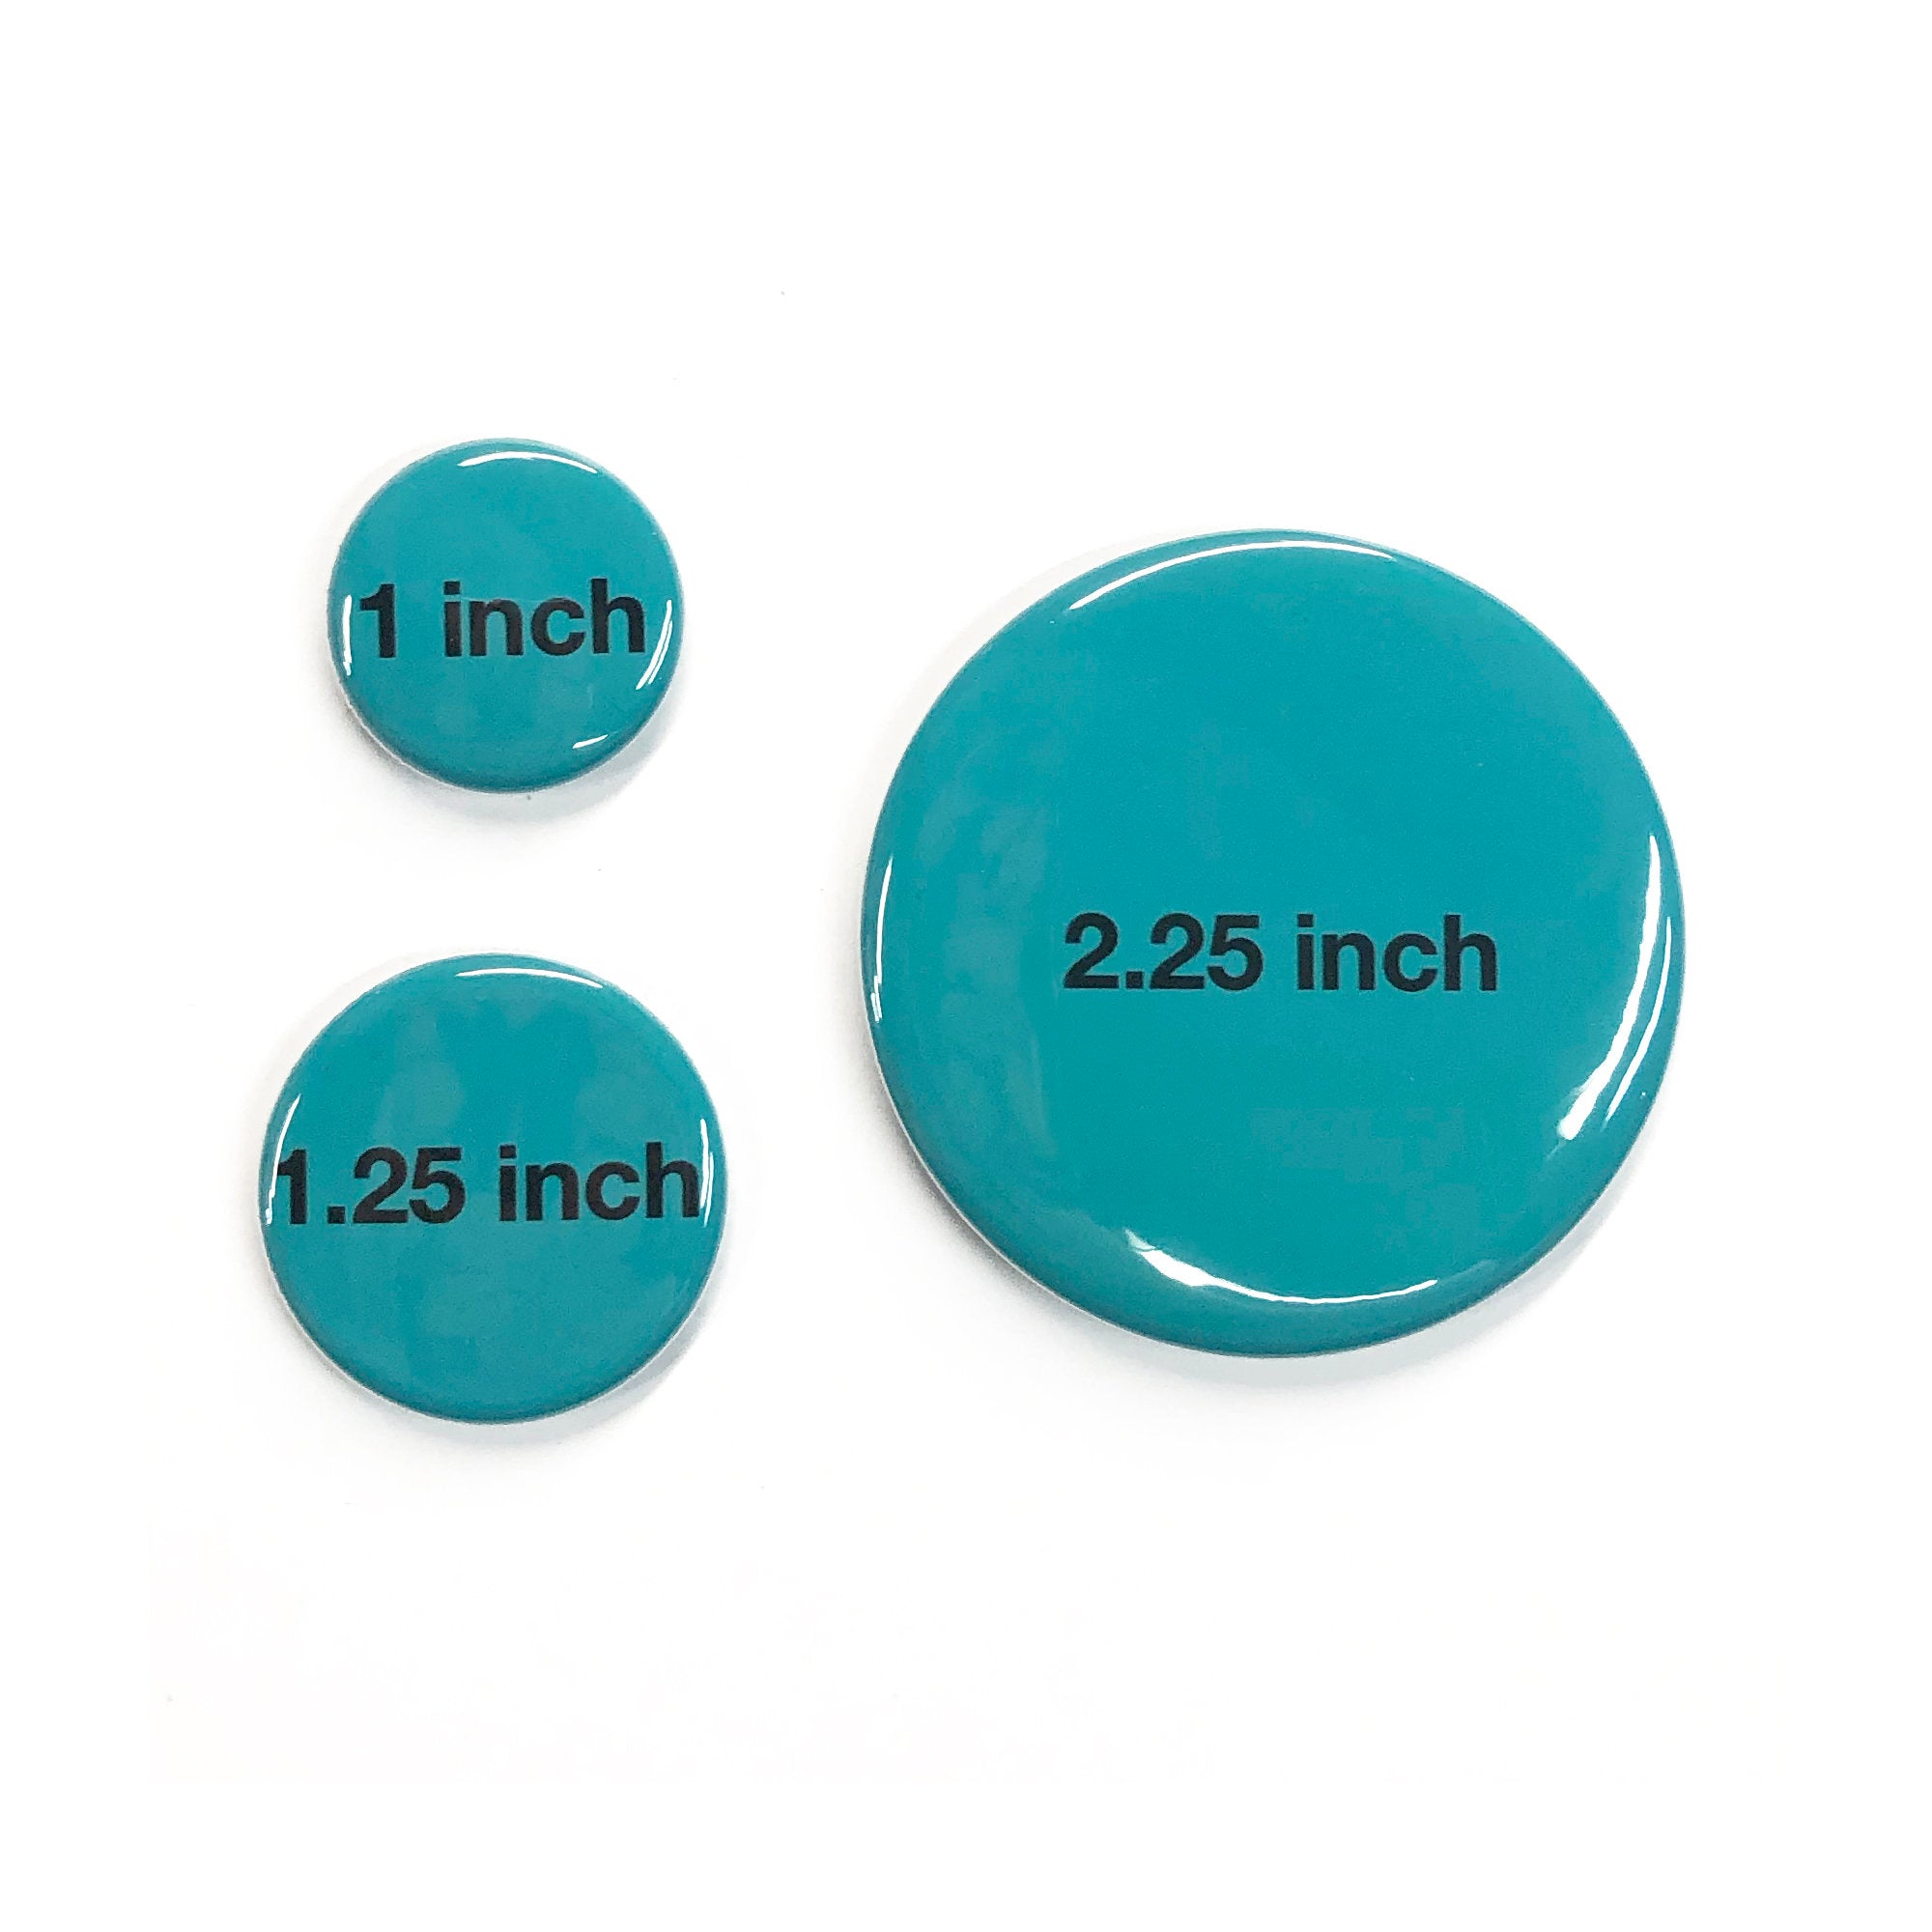 Breathe In Breathe Out Magnet, Pin Back Button or Pocket Mirror